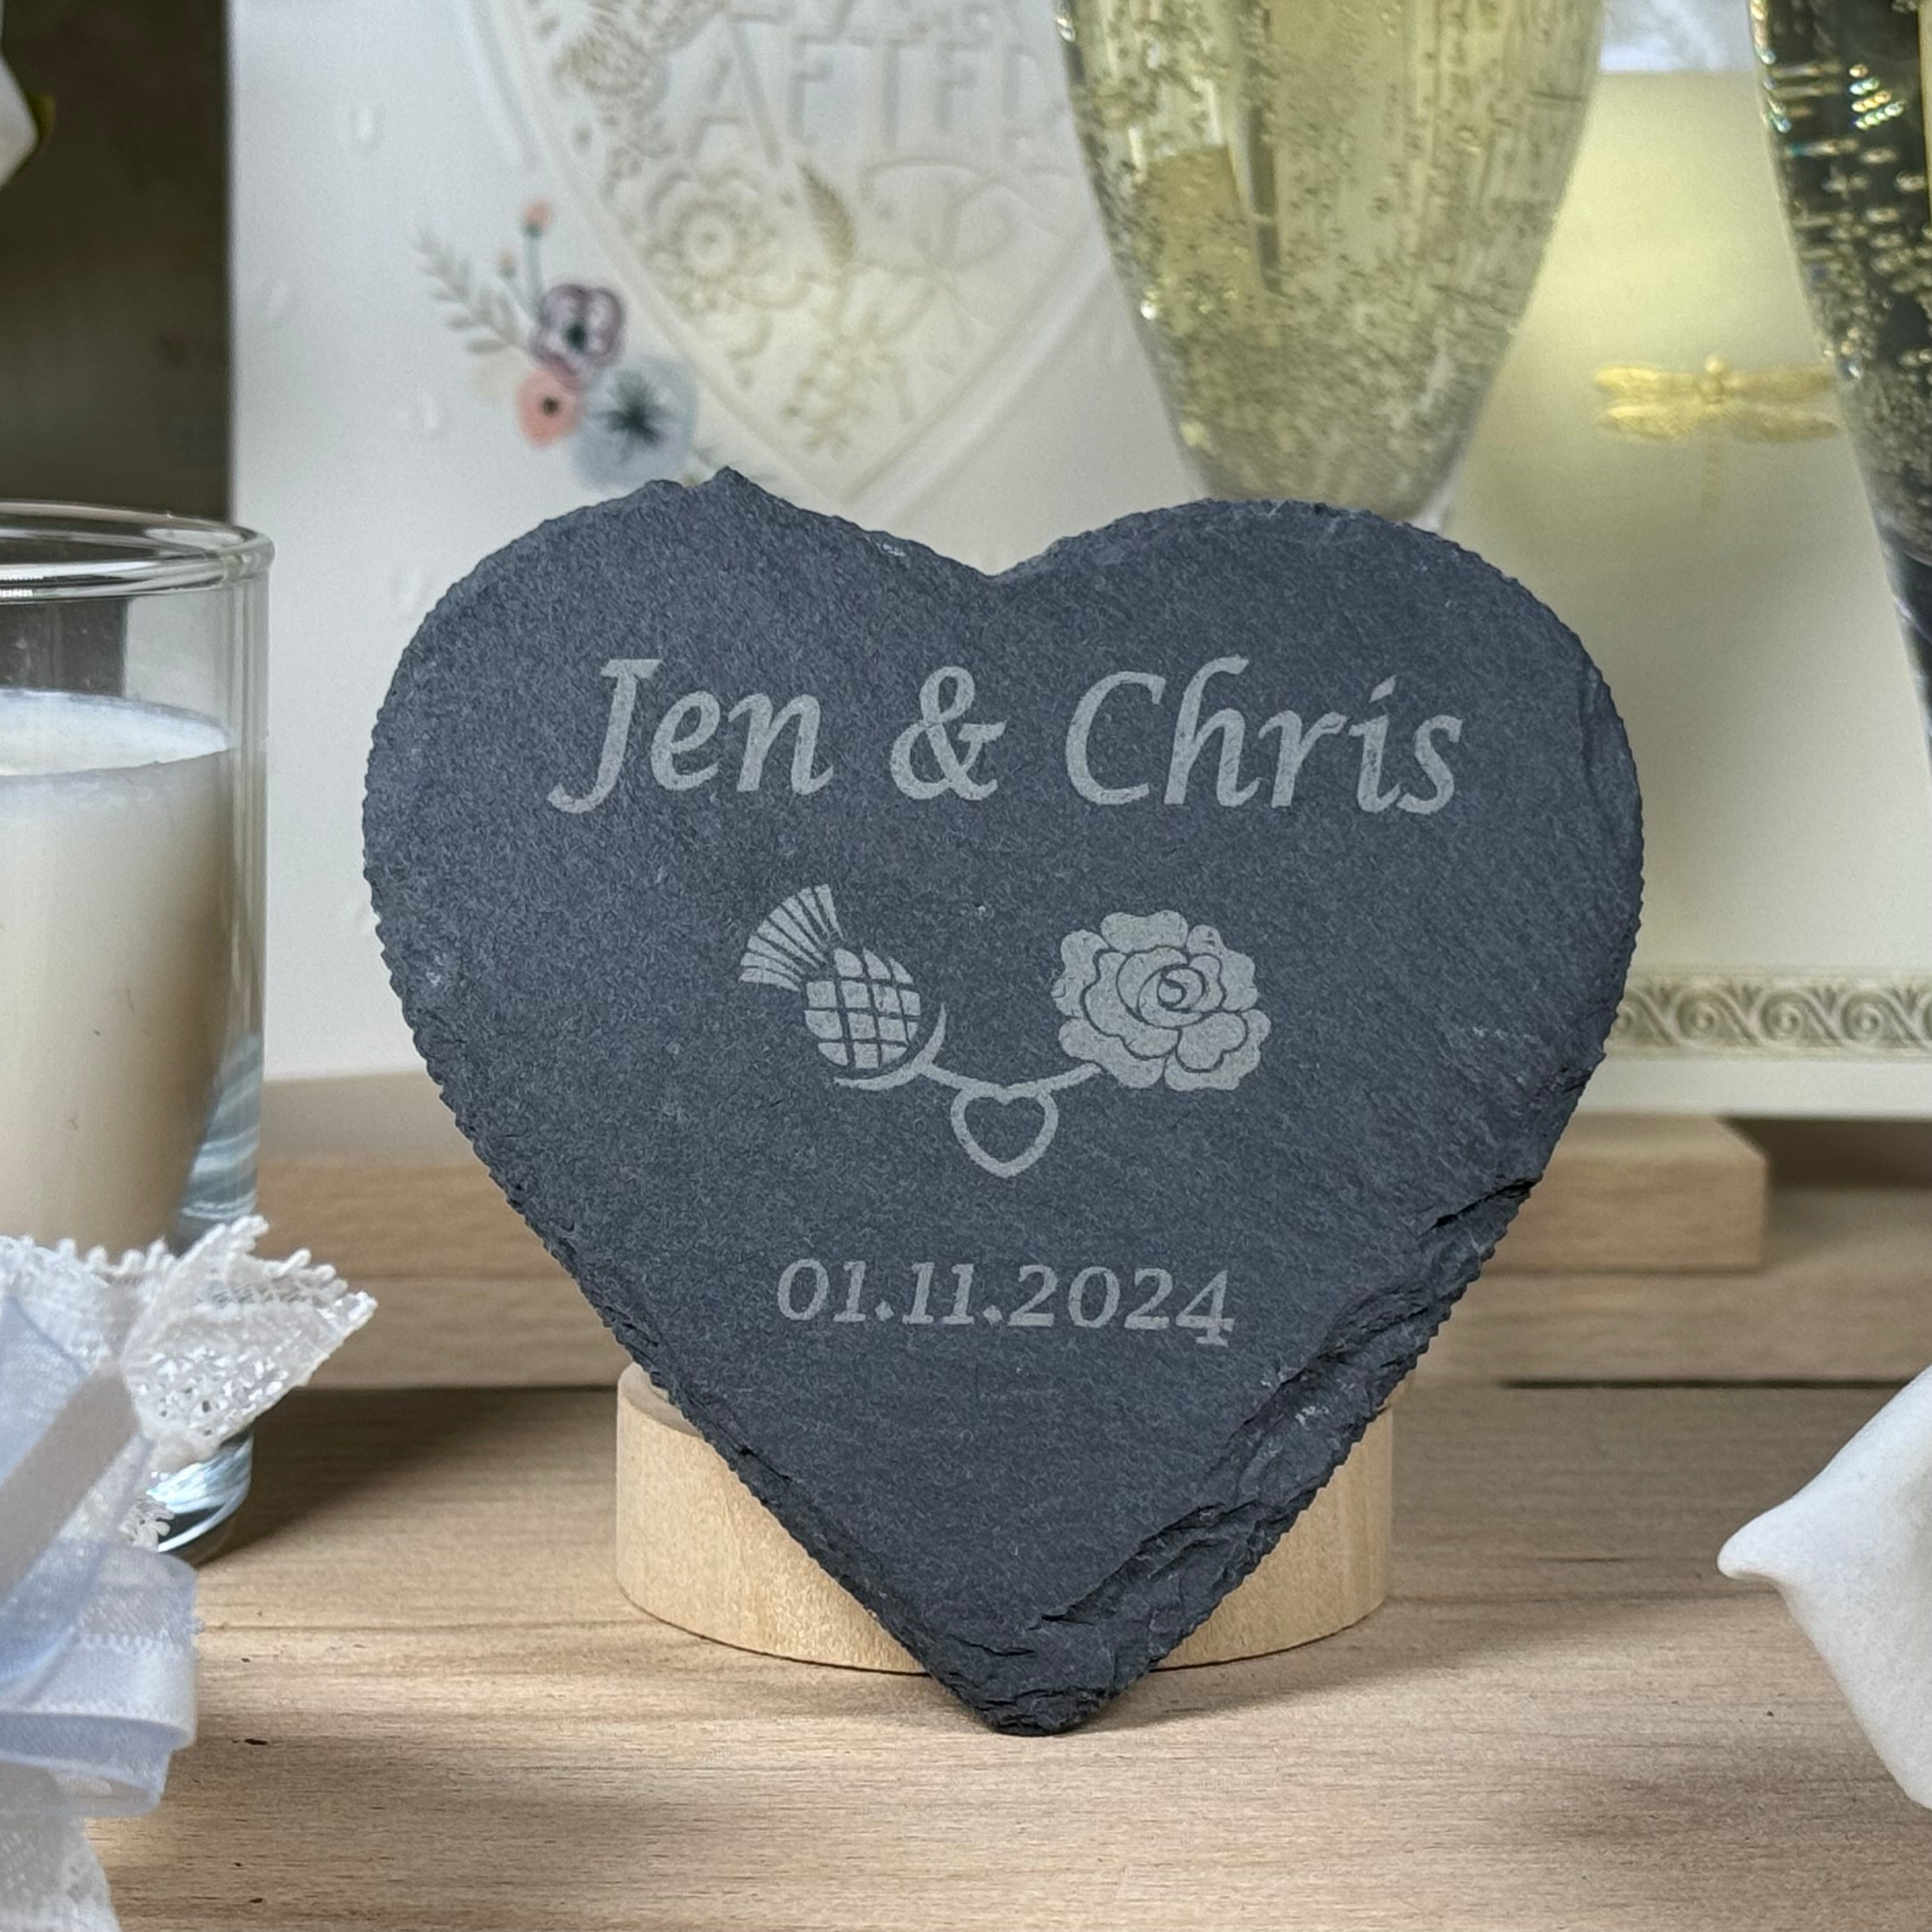 Personalised slate heart-shaped wedding coaster - names, date, thistle-rose decal